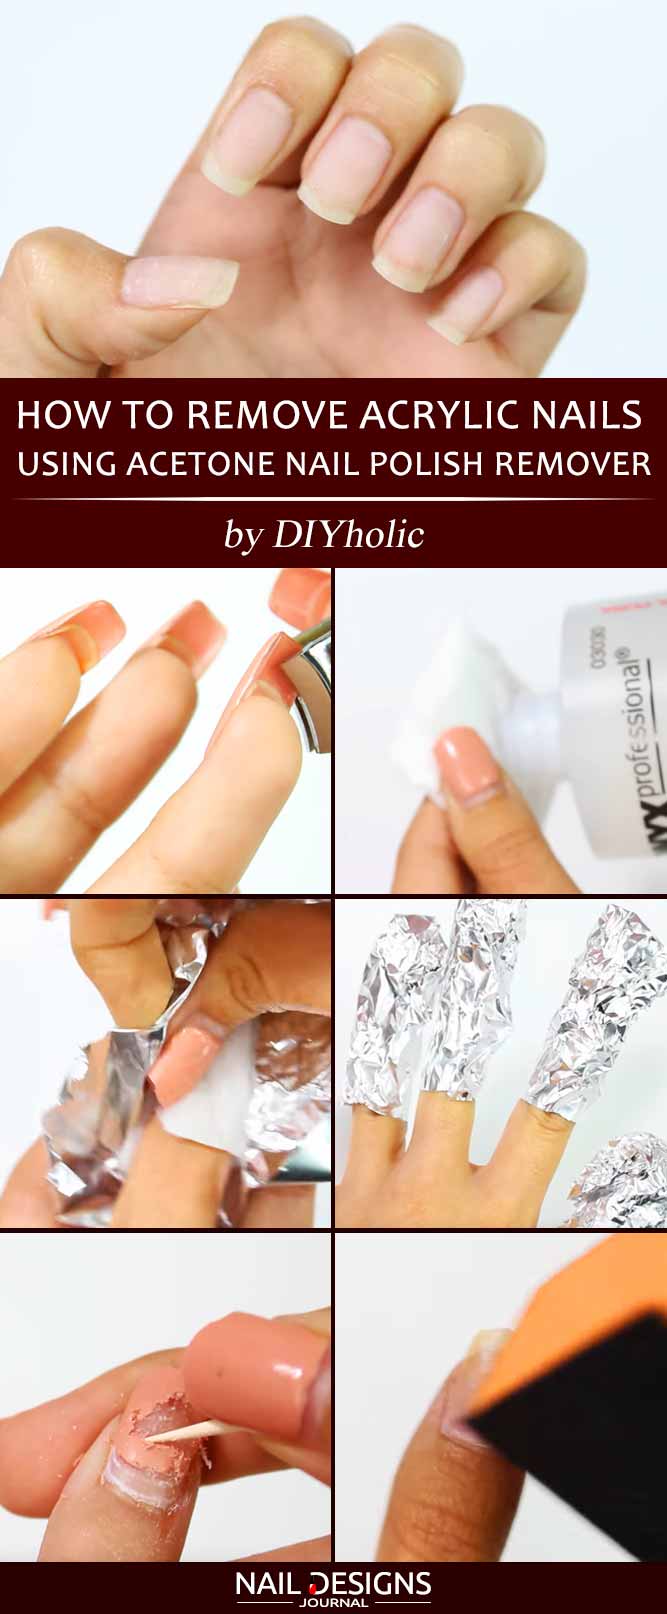 How To Remove Acrylic Nails Using Acetone Nail Polish Remover